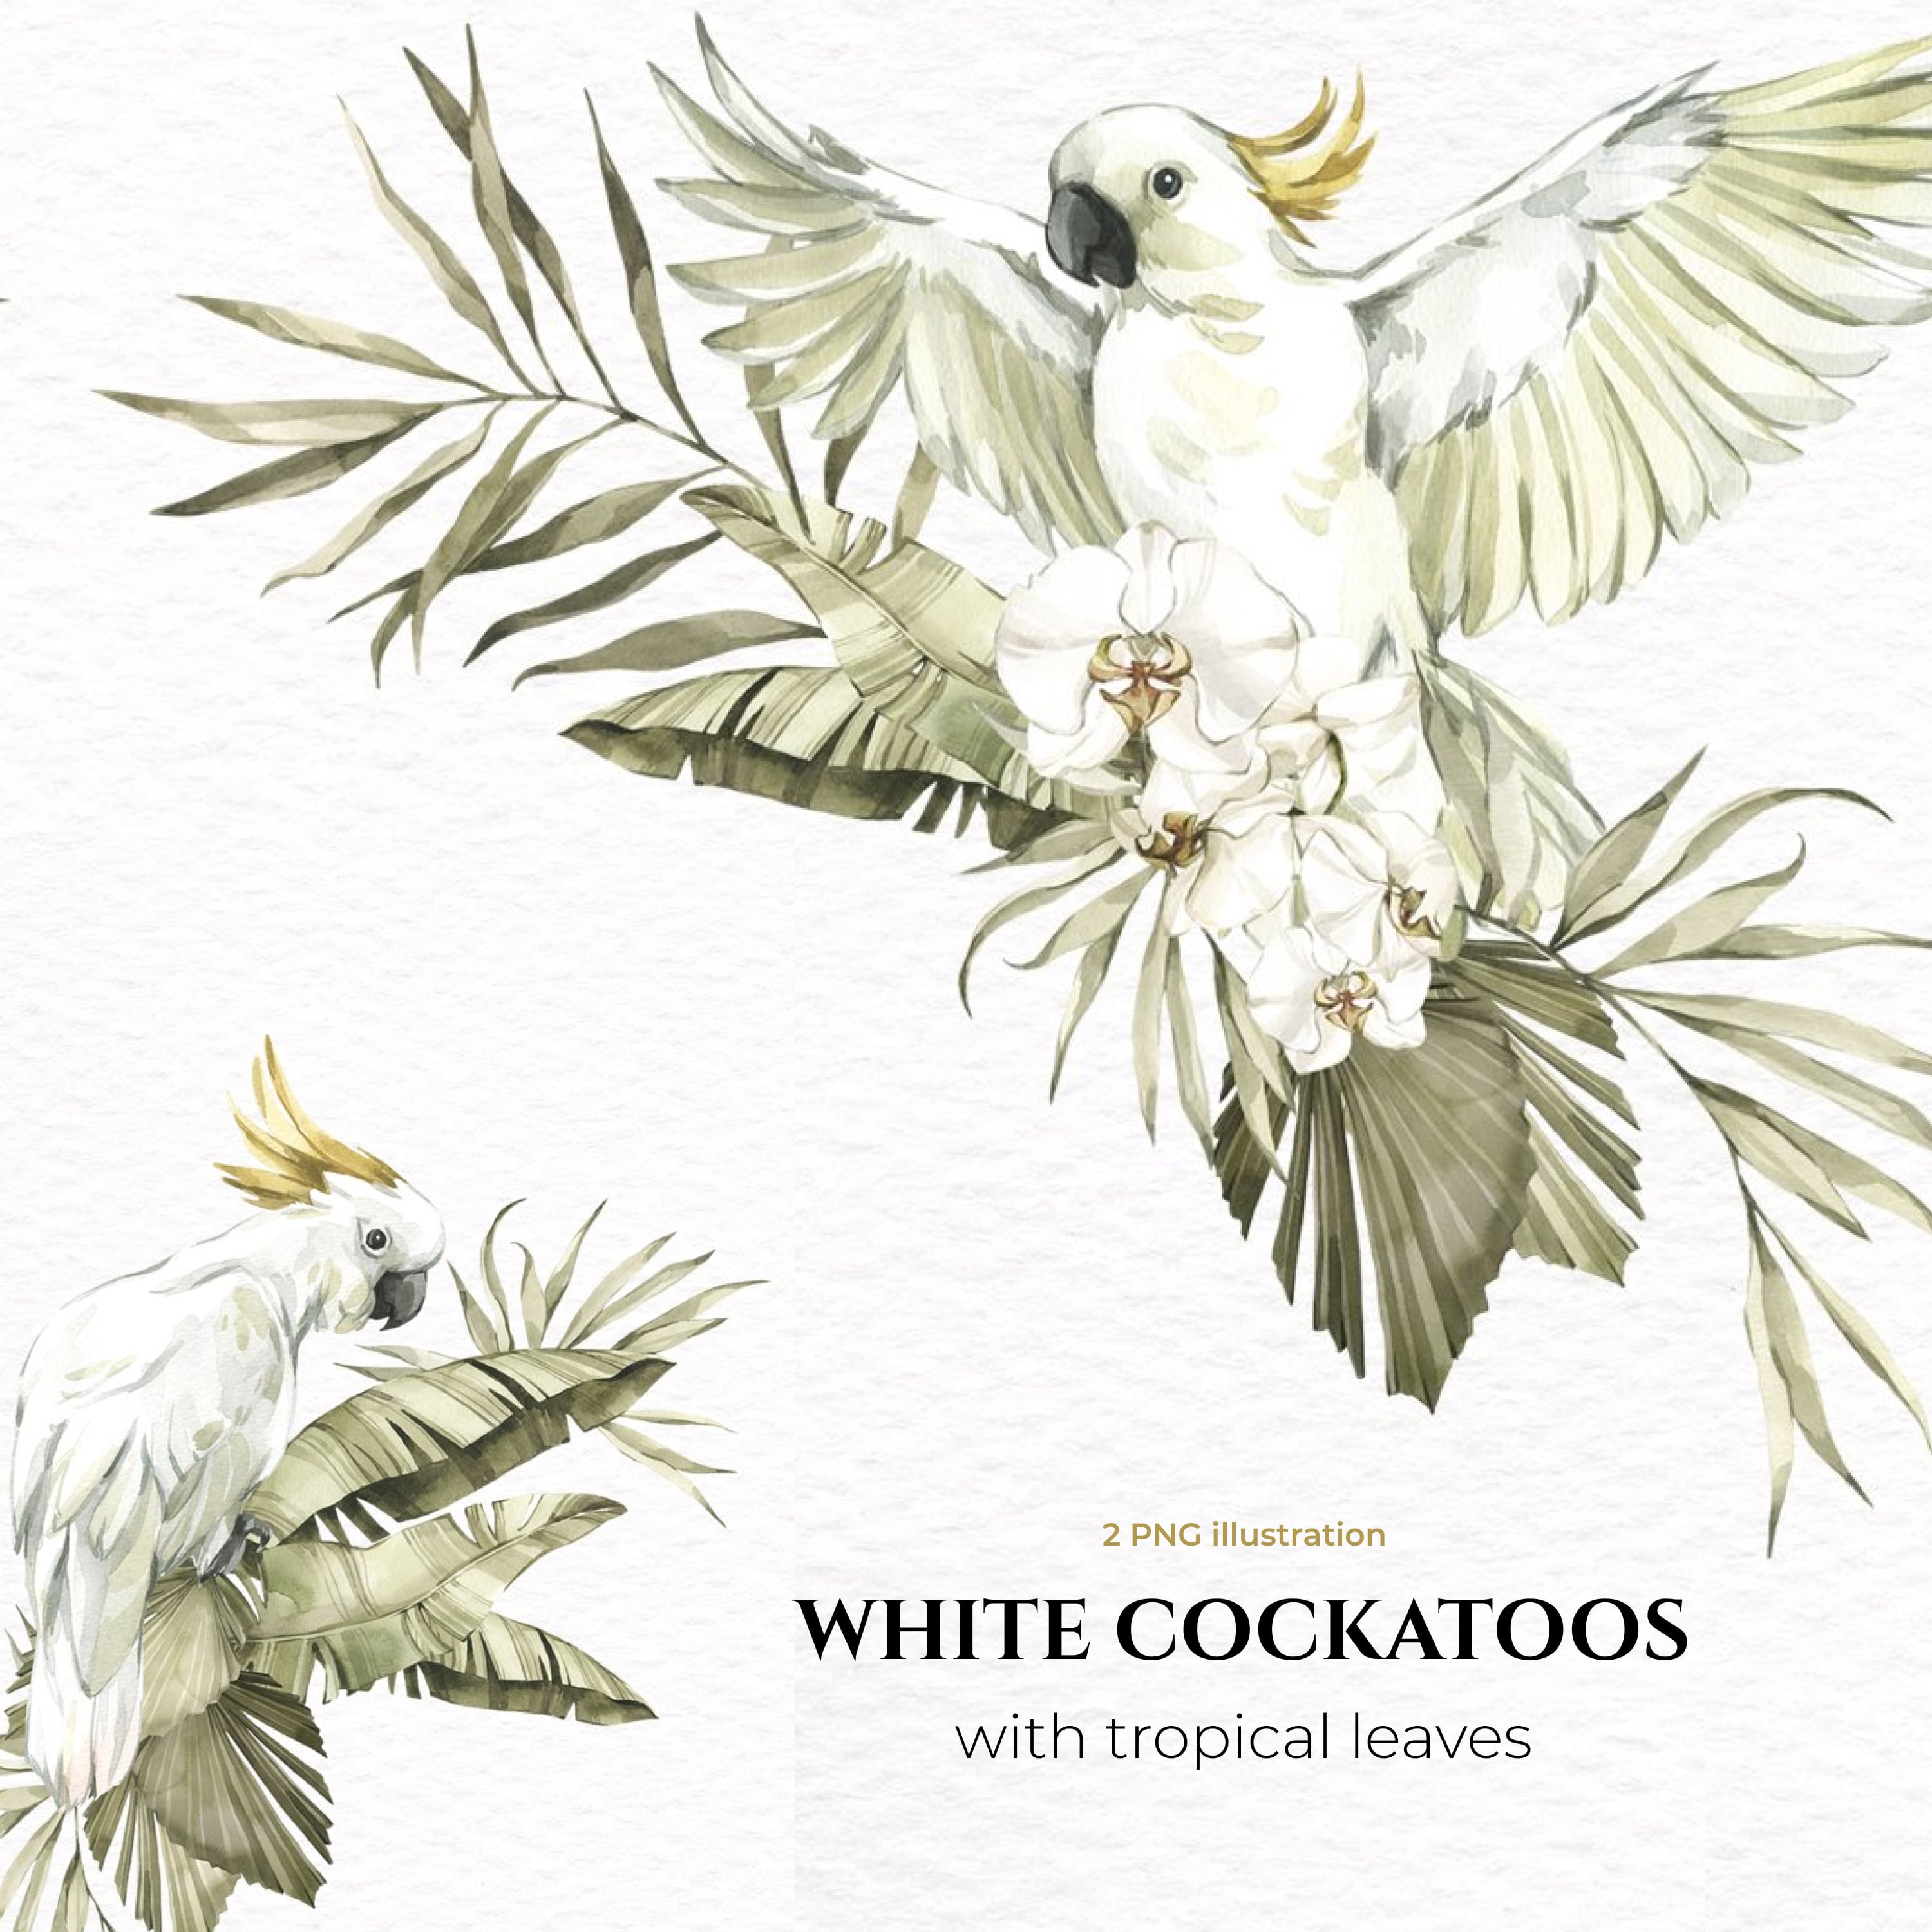 WHITE COCKATOOS with tropical leaves. Watercolor PNG clipart.